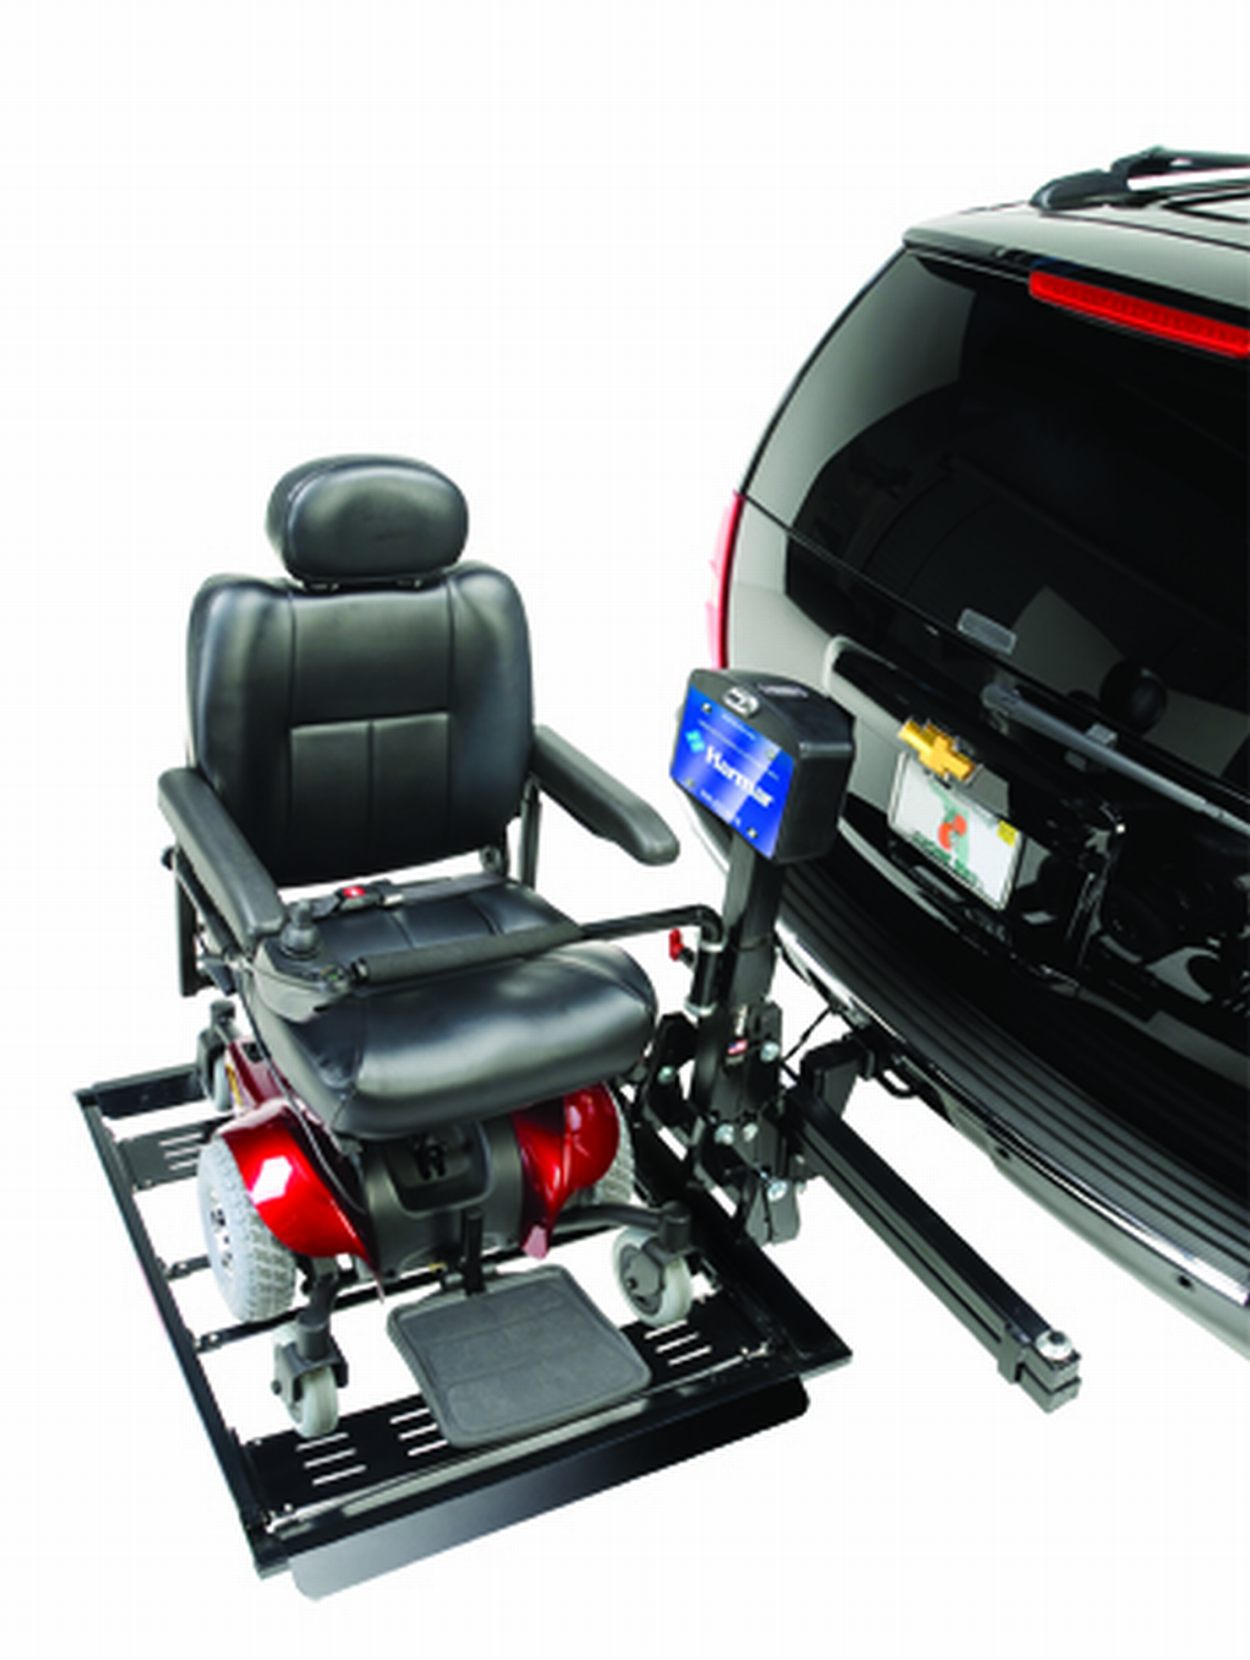 Harmar Outside Vehicle Scooter Lifts and Wheelchair Lifts